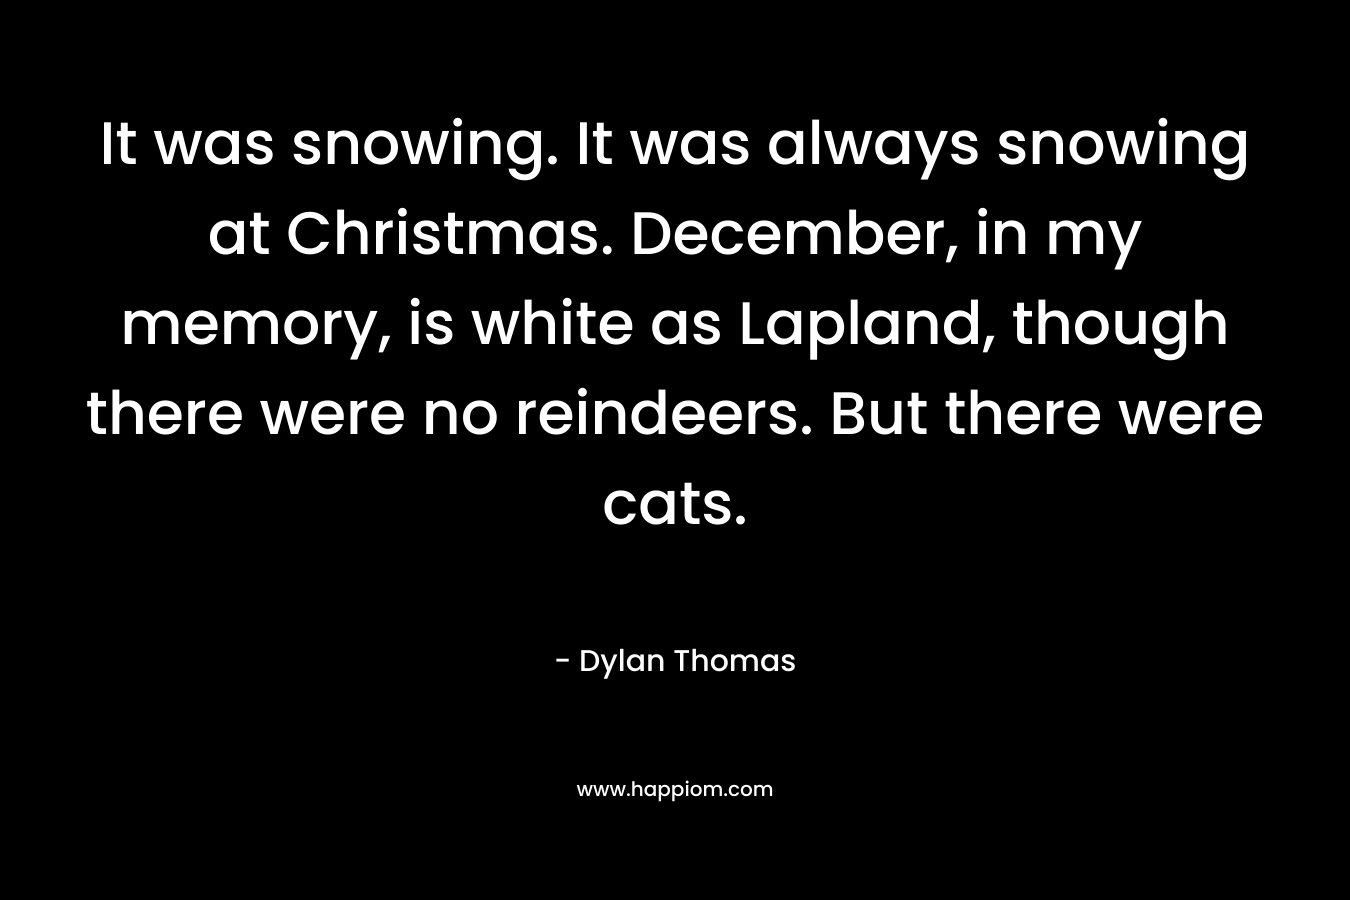 It was snowing. It was always snowing at Christmas. December, in my memory, is white as Lapland, though there were no reindeers. But there were cats.